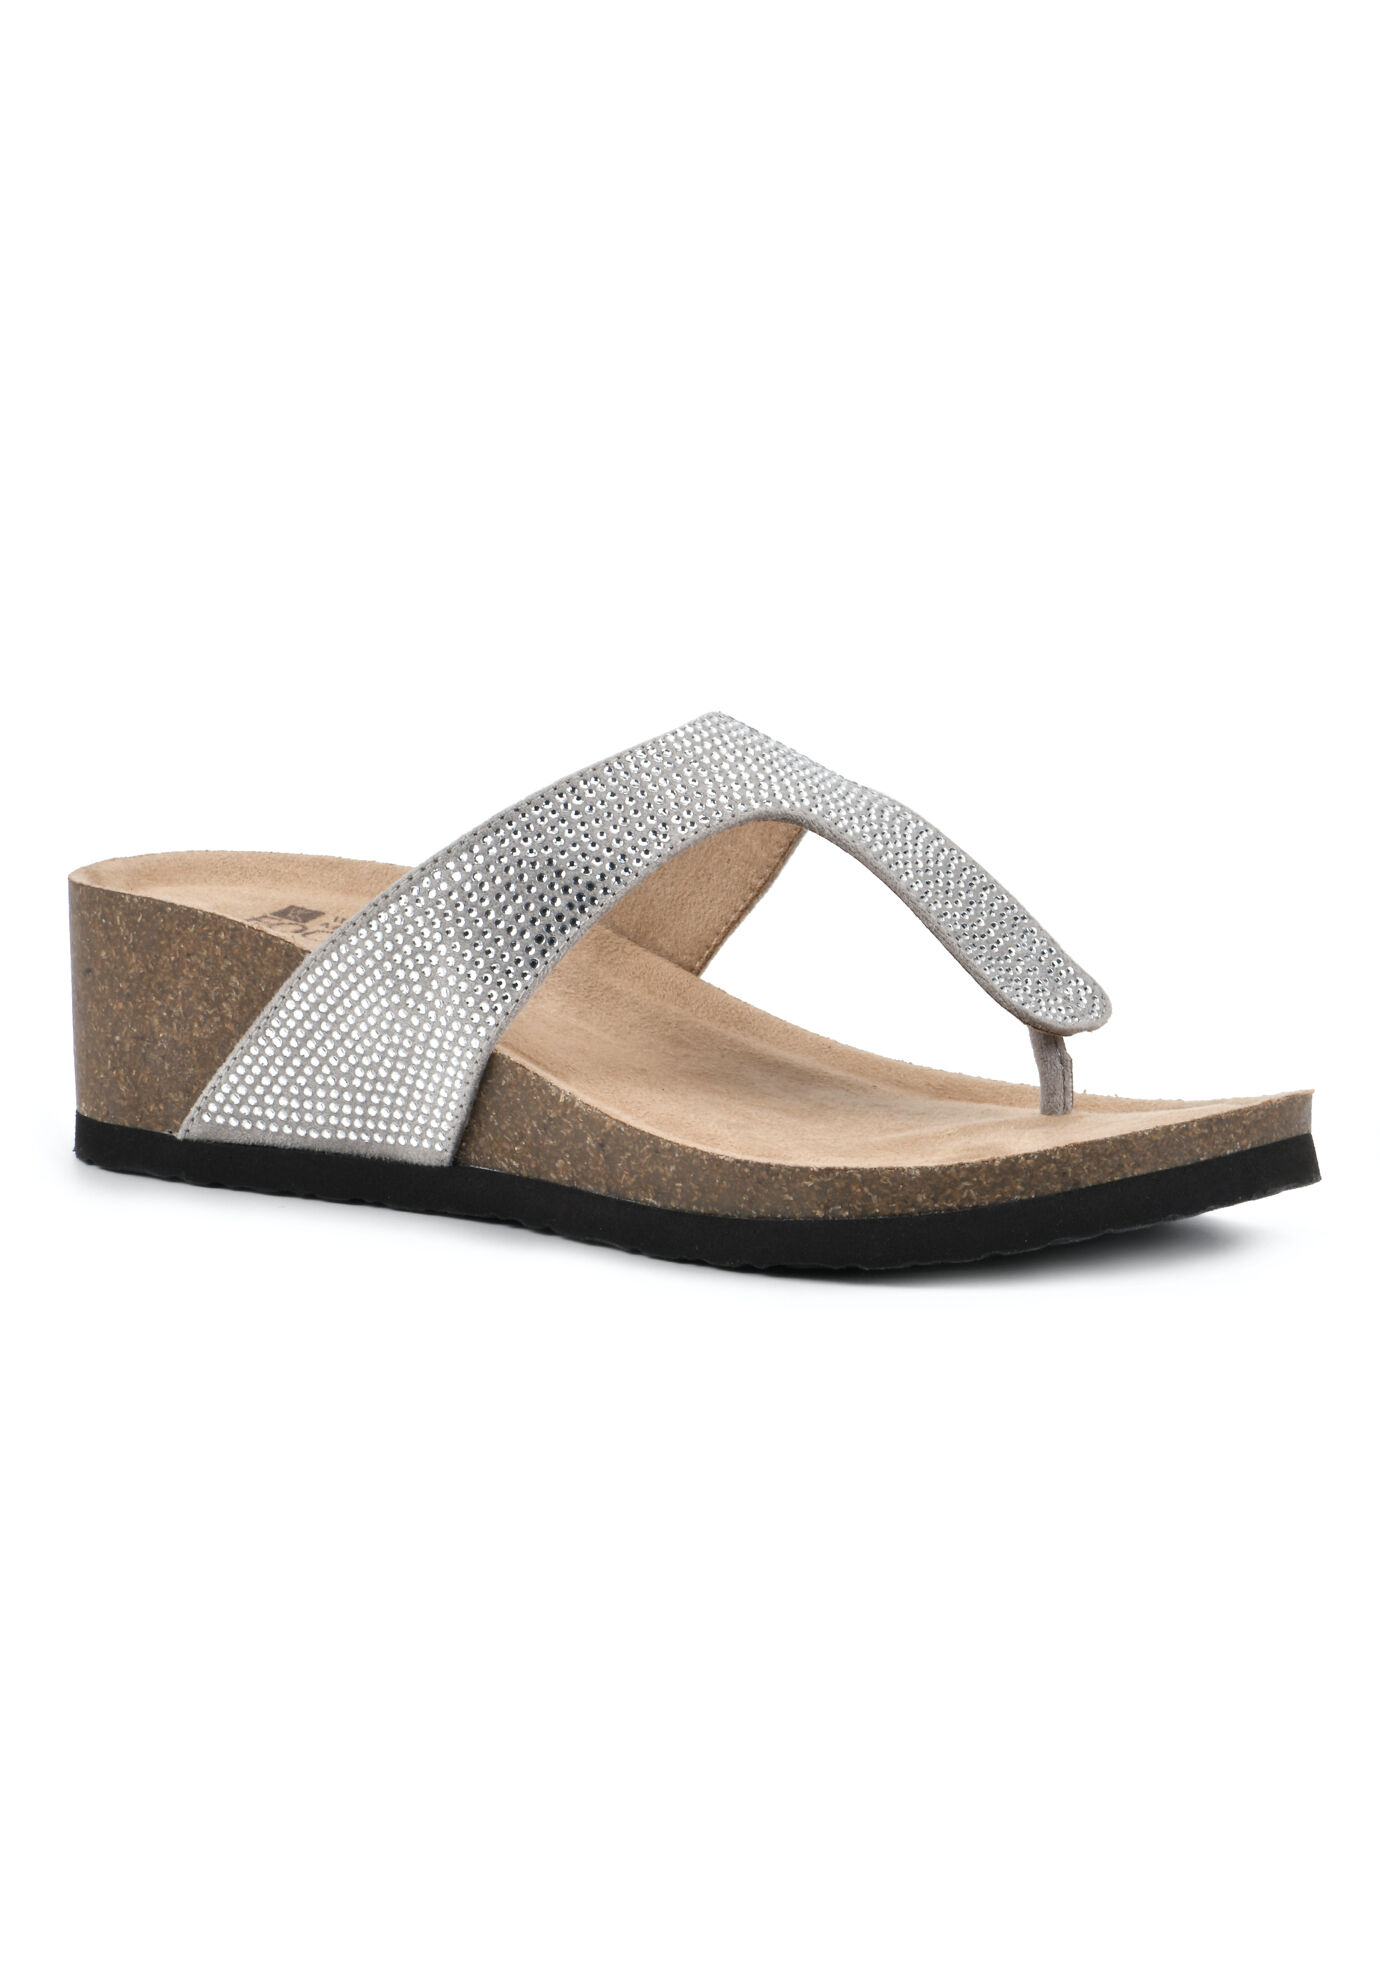 Women's Action Cork Wedge Sandal by White Mountain in Silver Multi (Size 11 M)